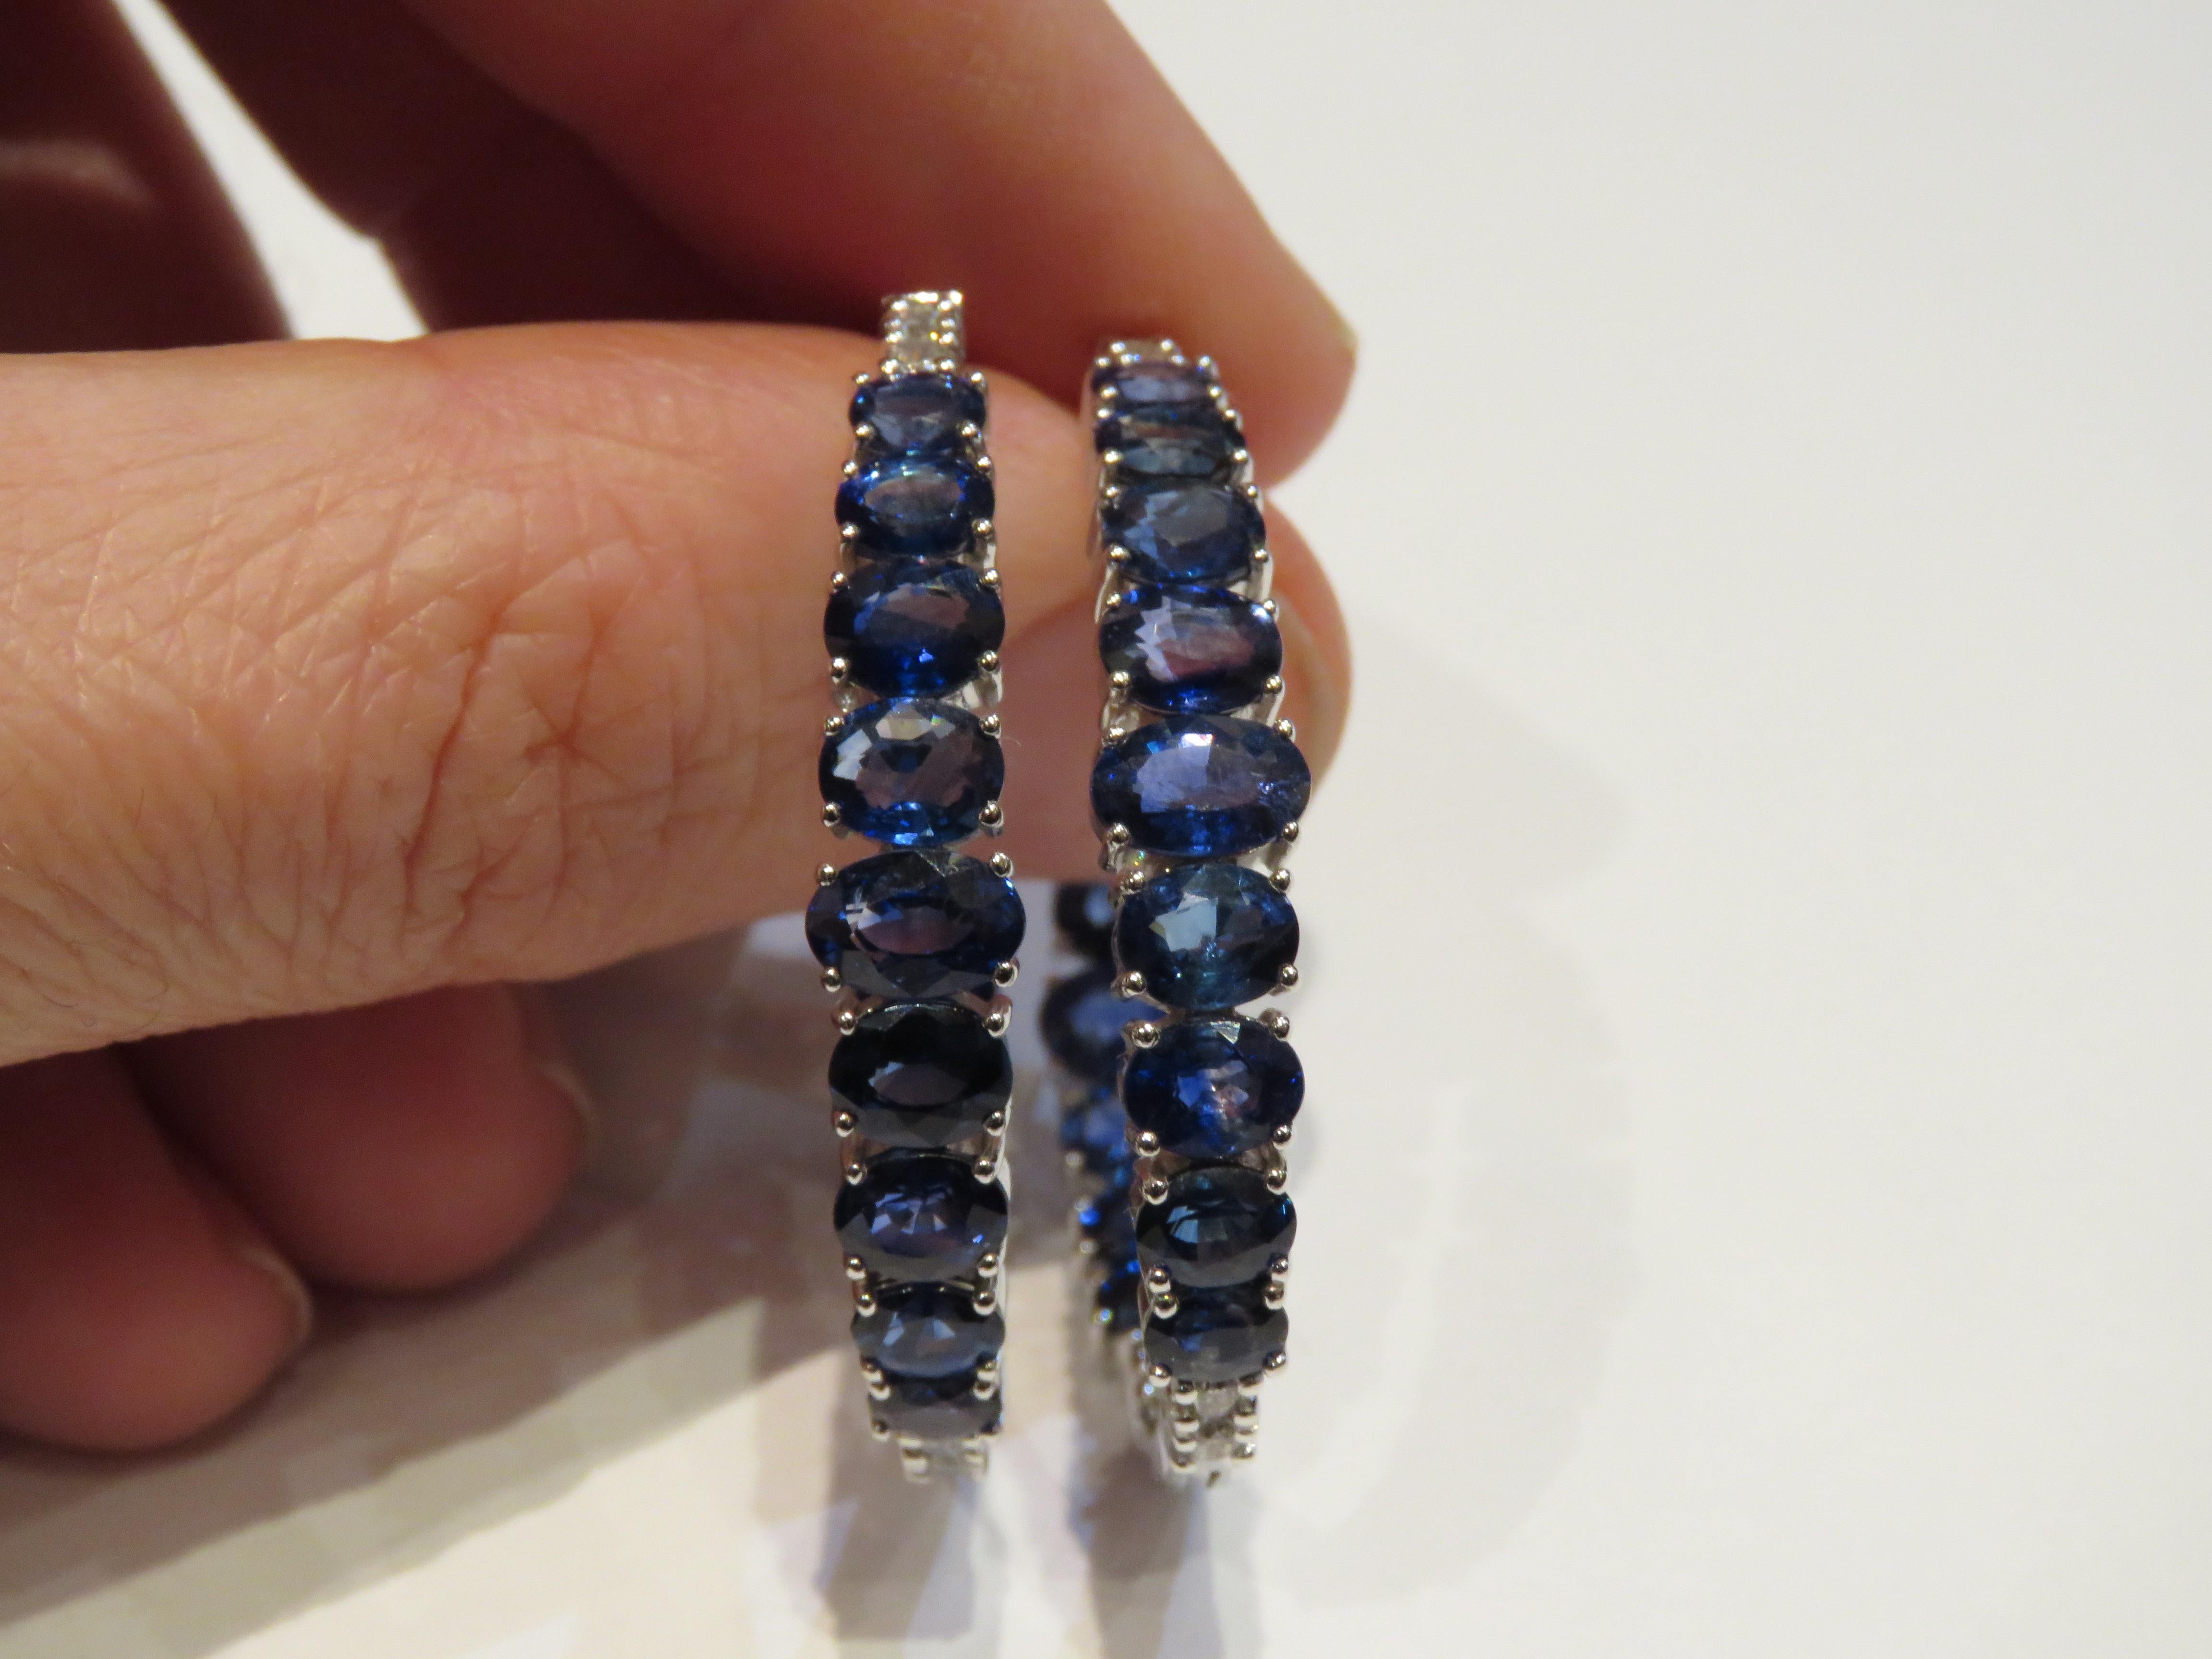 The Following Item we are offering are these Extremely Rare Beautiful 18KT Gold Fine Large Blue Sapphire Hoops comprised of approx 13CTS Carats of Fine Gorgeous Glittering Oval Blue Sapphires and Diamonds!! The Sapphires and Diamonds are of